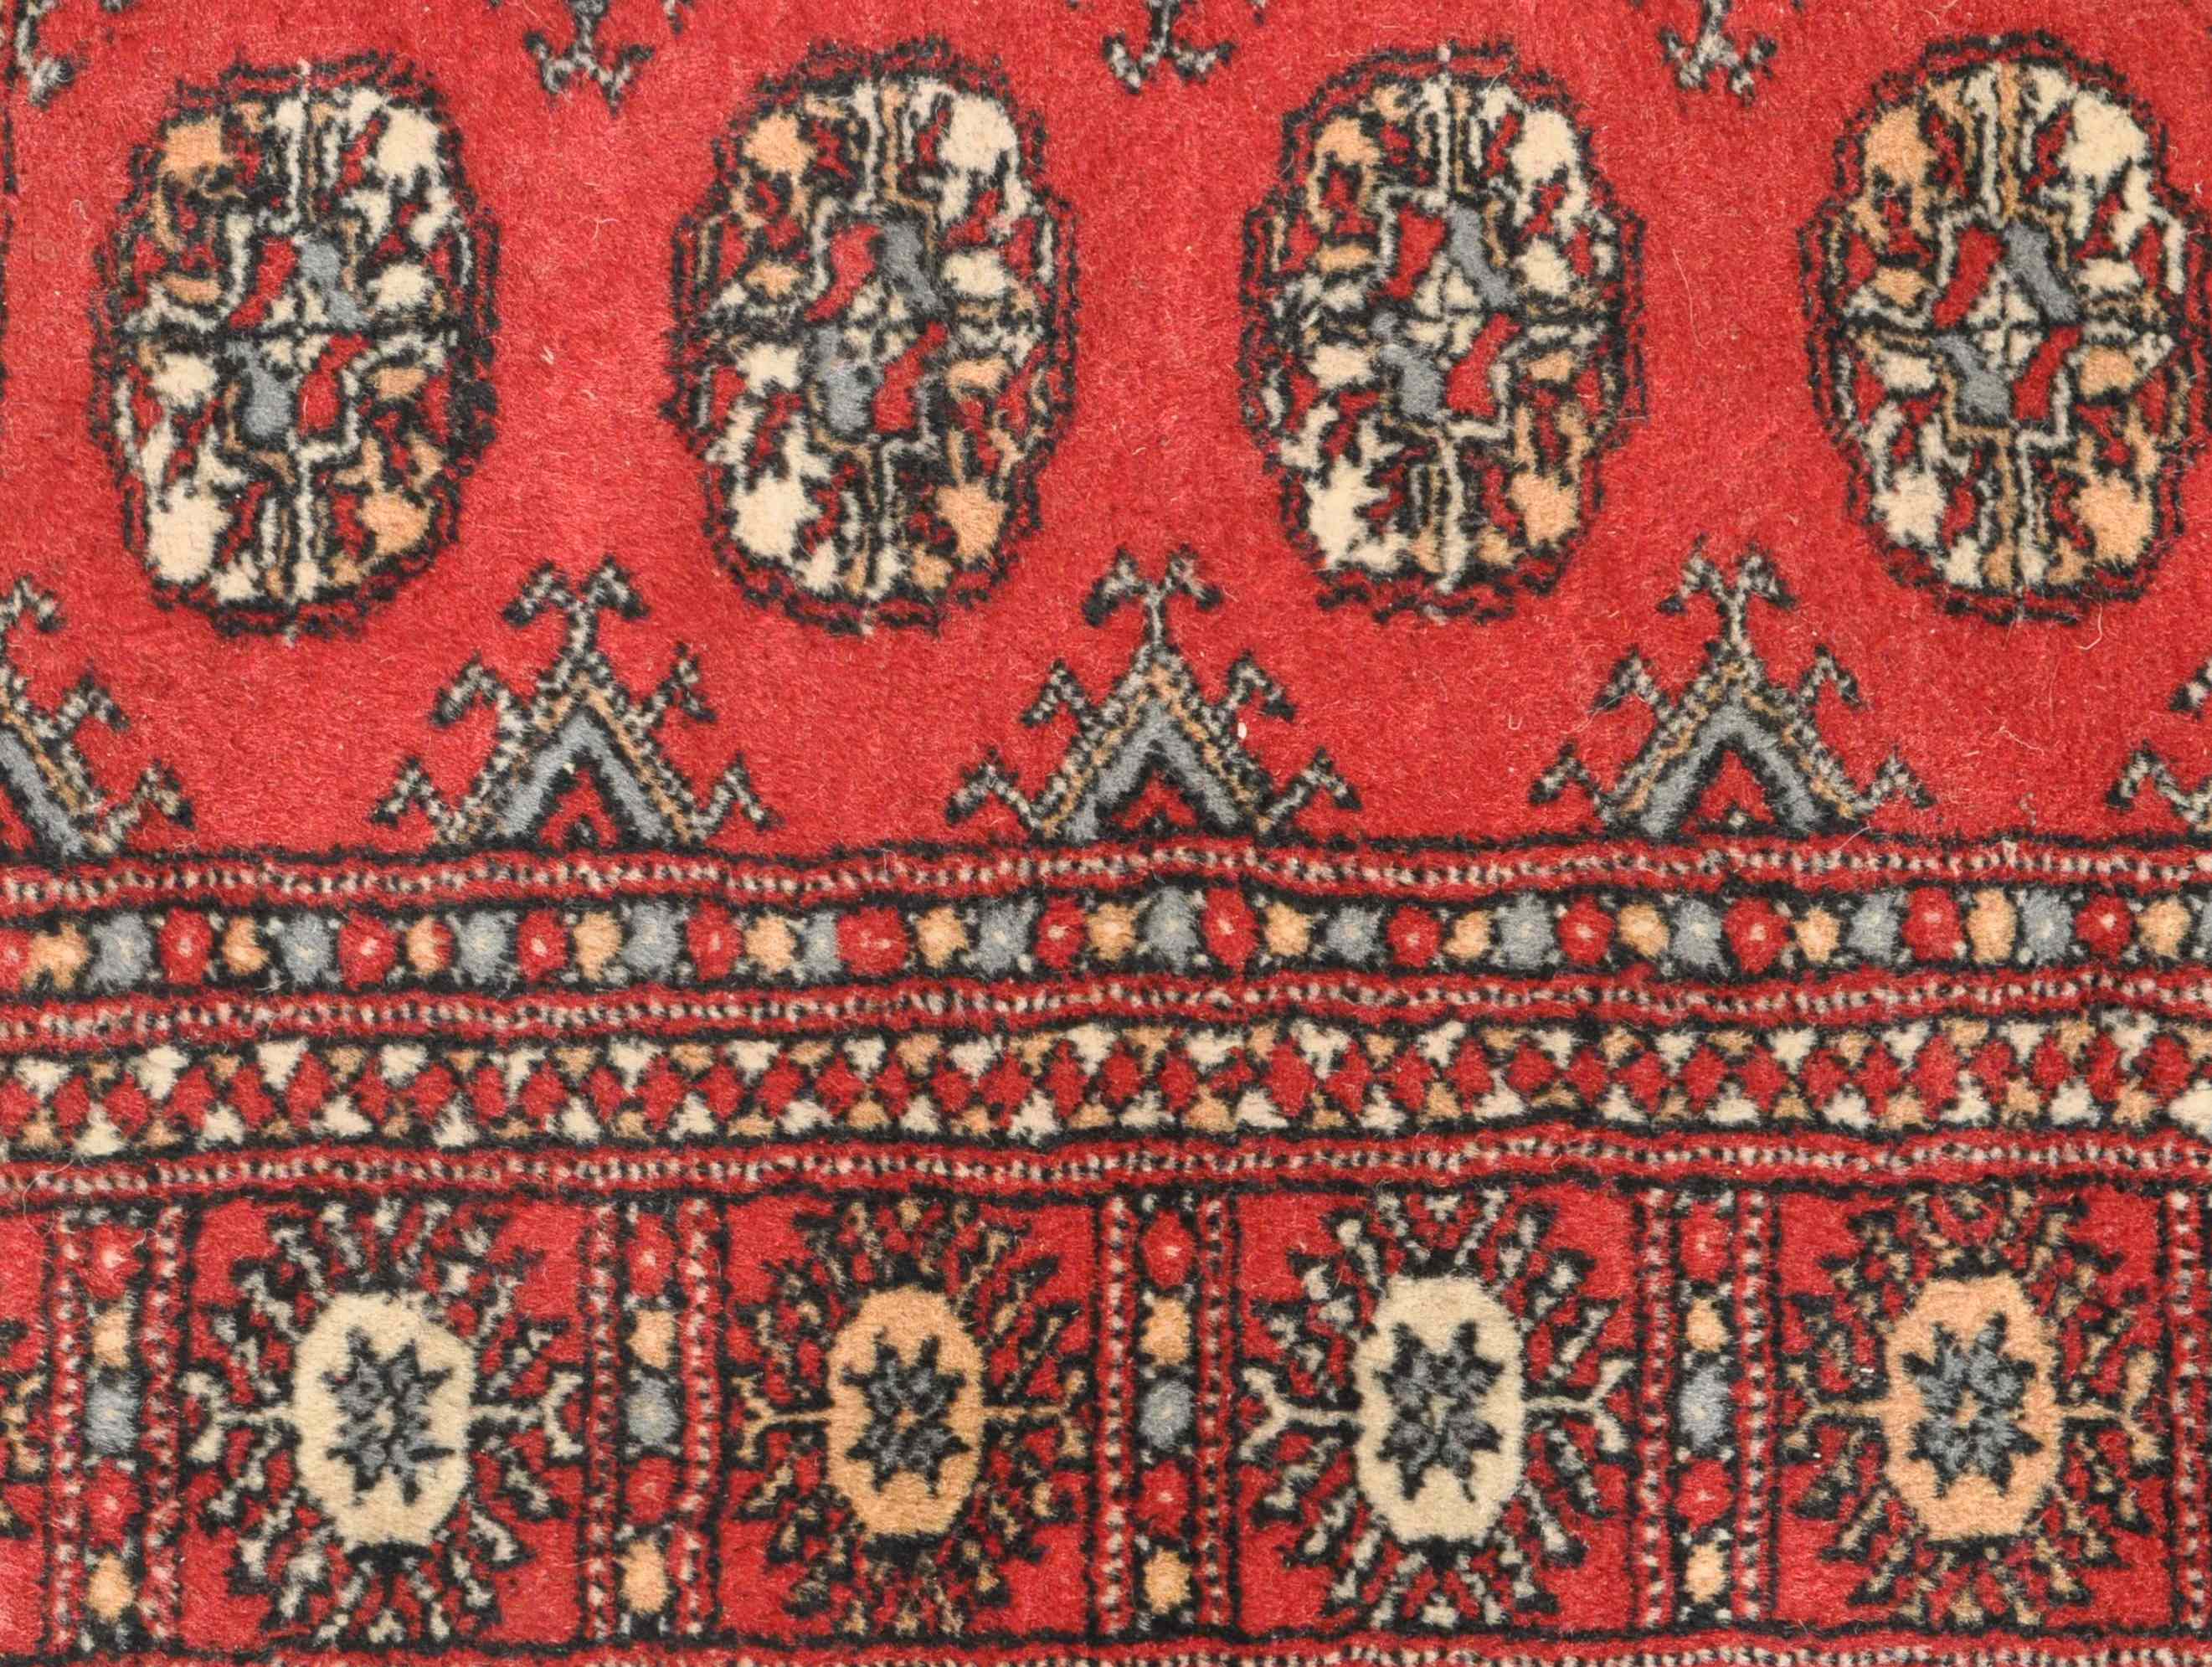 VINTAGE RED GROUND FLOOR RUG WITH MEDALLION AND PATTREND DECORATION - Image 3 of 5